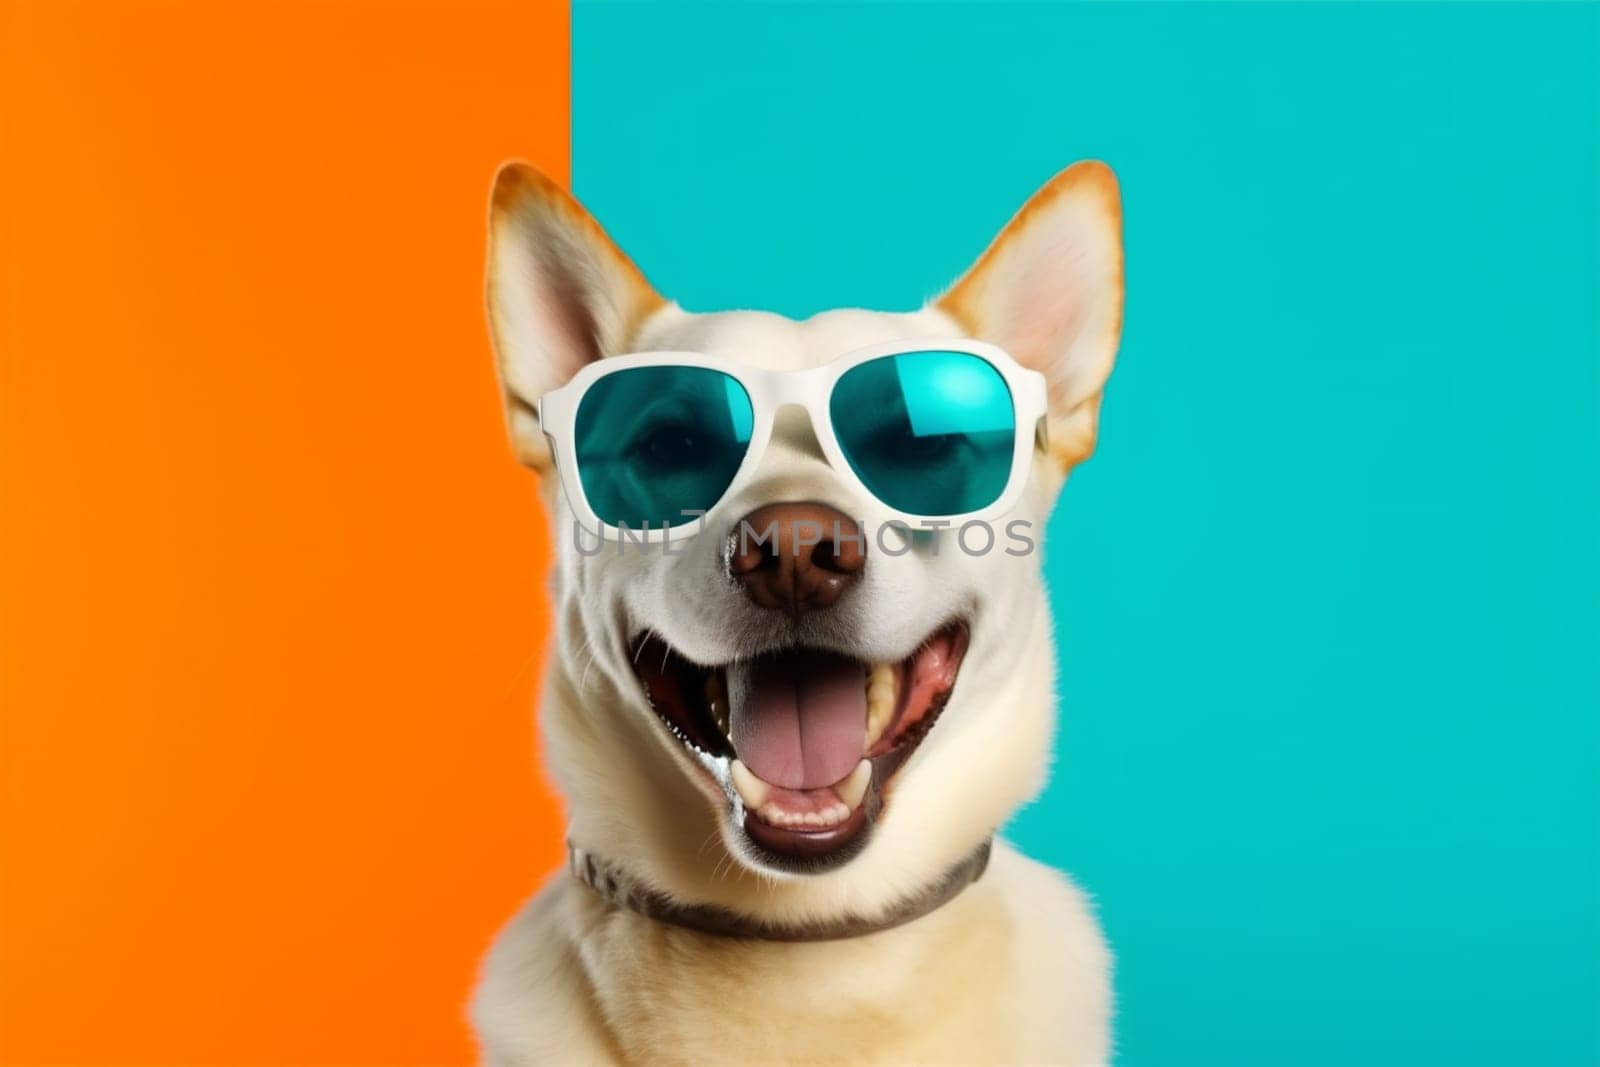 dog smile sunglasses brown cool cute animal purebred pet funny isolated stylish doggy pink portrait adorable summer friend beautiful background young. Generative AI.